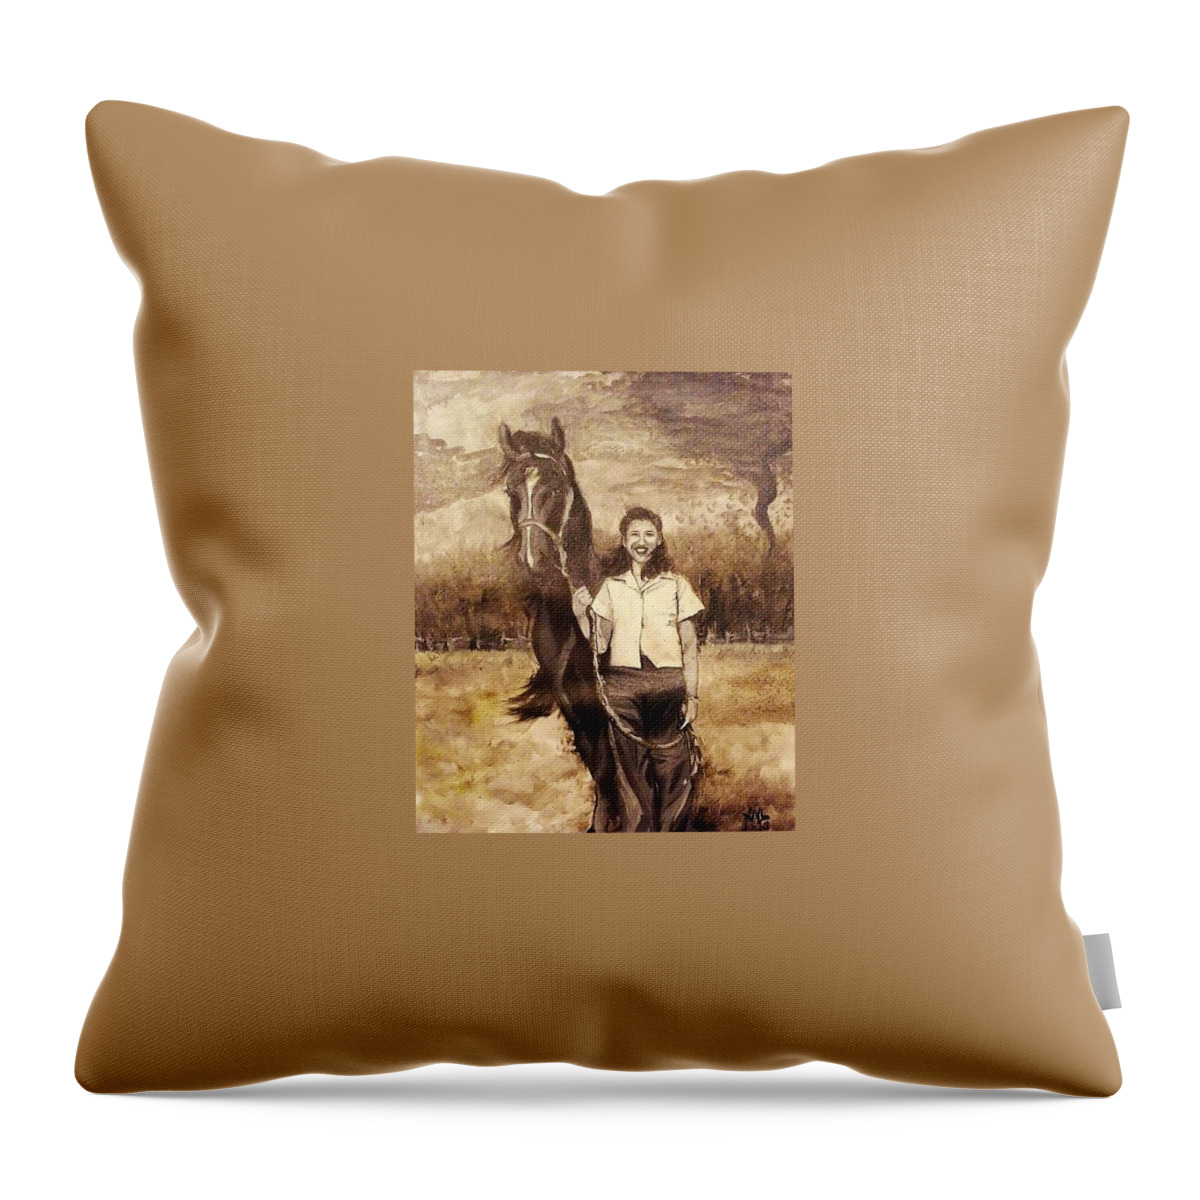 Nostalgia Throw Pillow featuring the painting Memom by Alexandria Weaselwise Busen